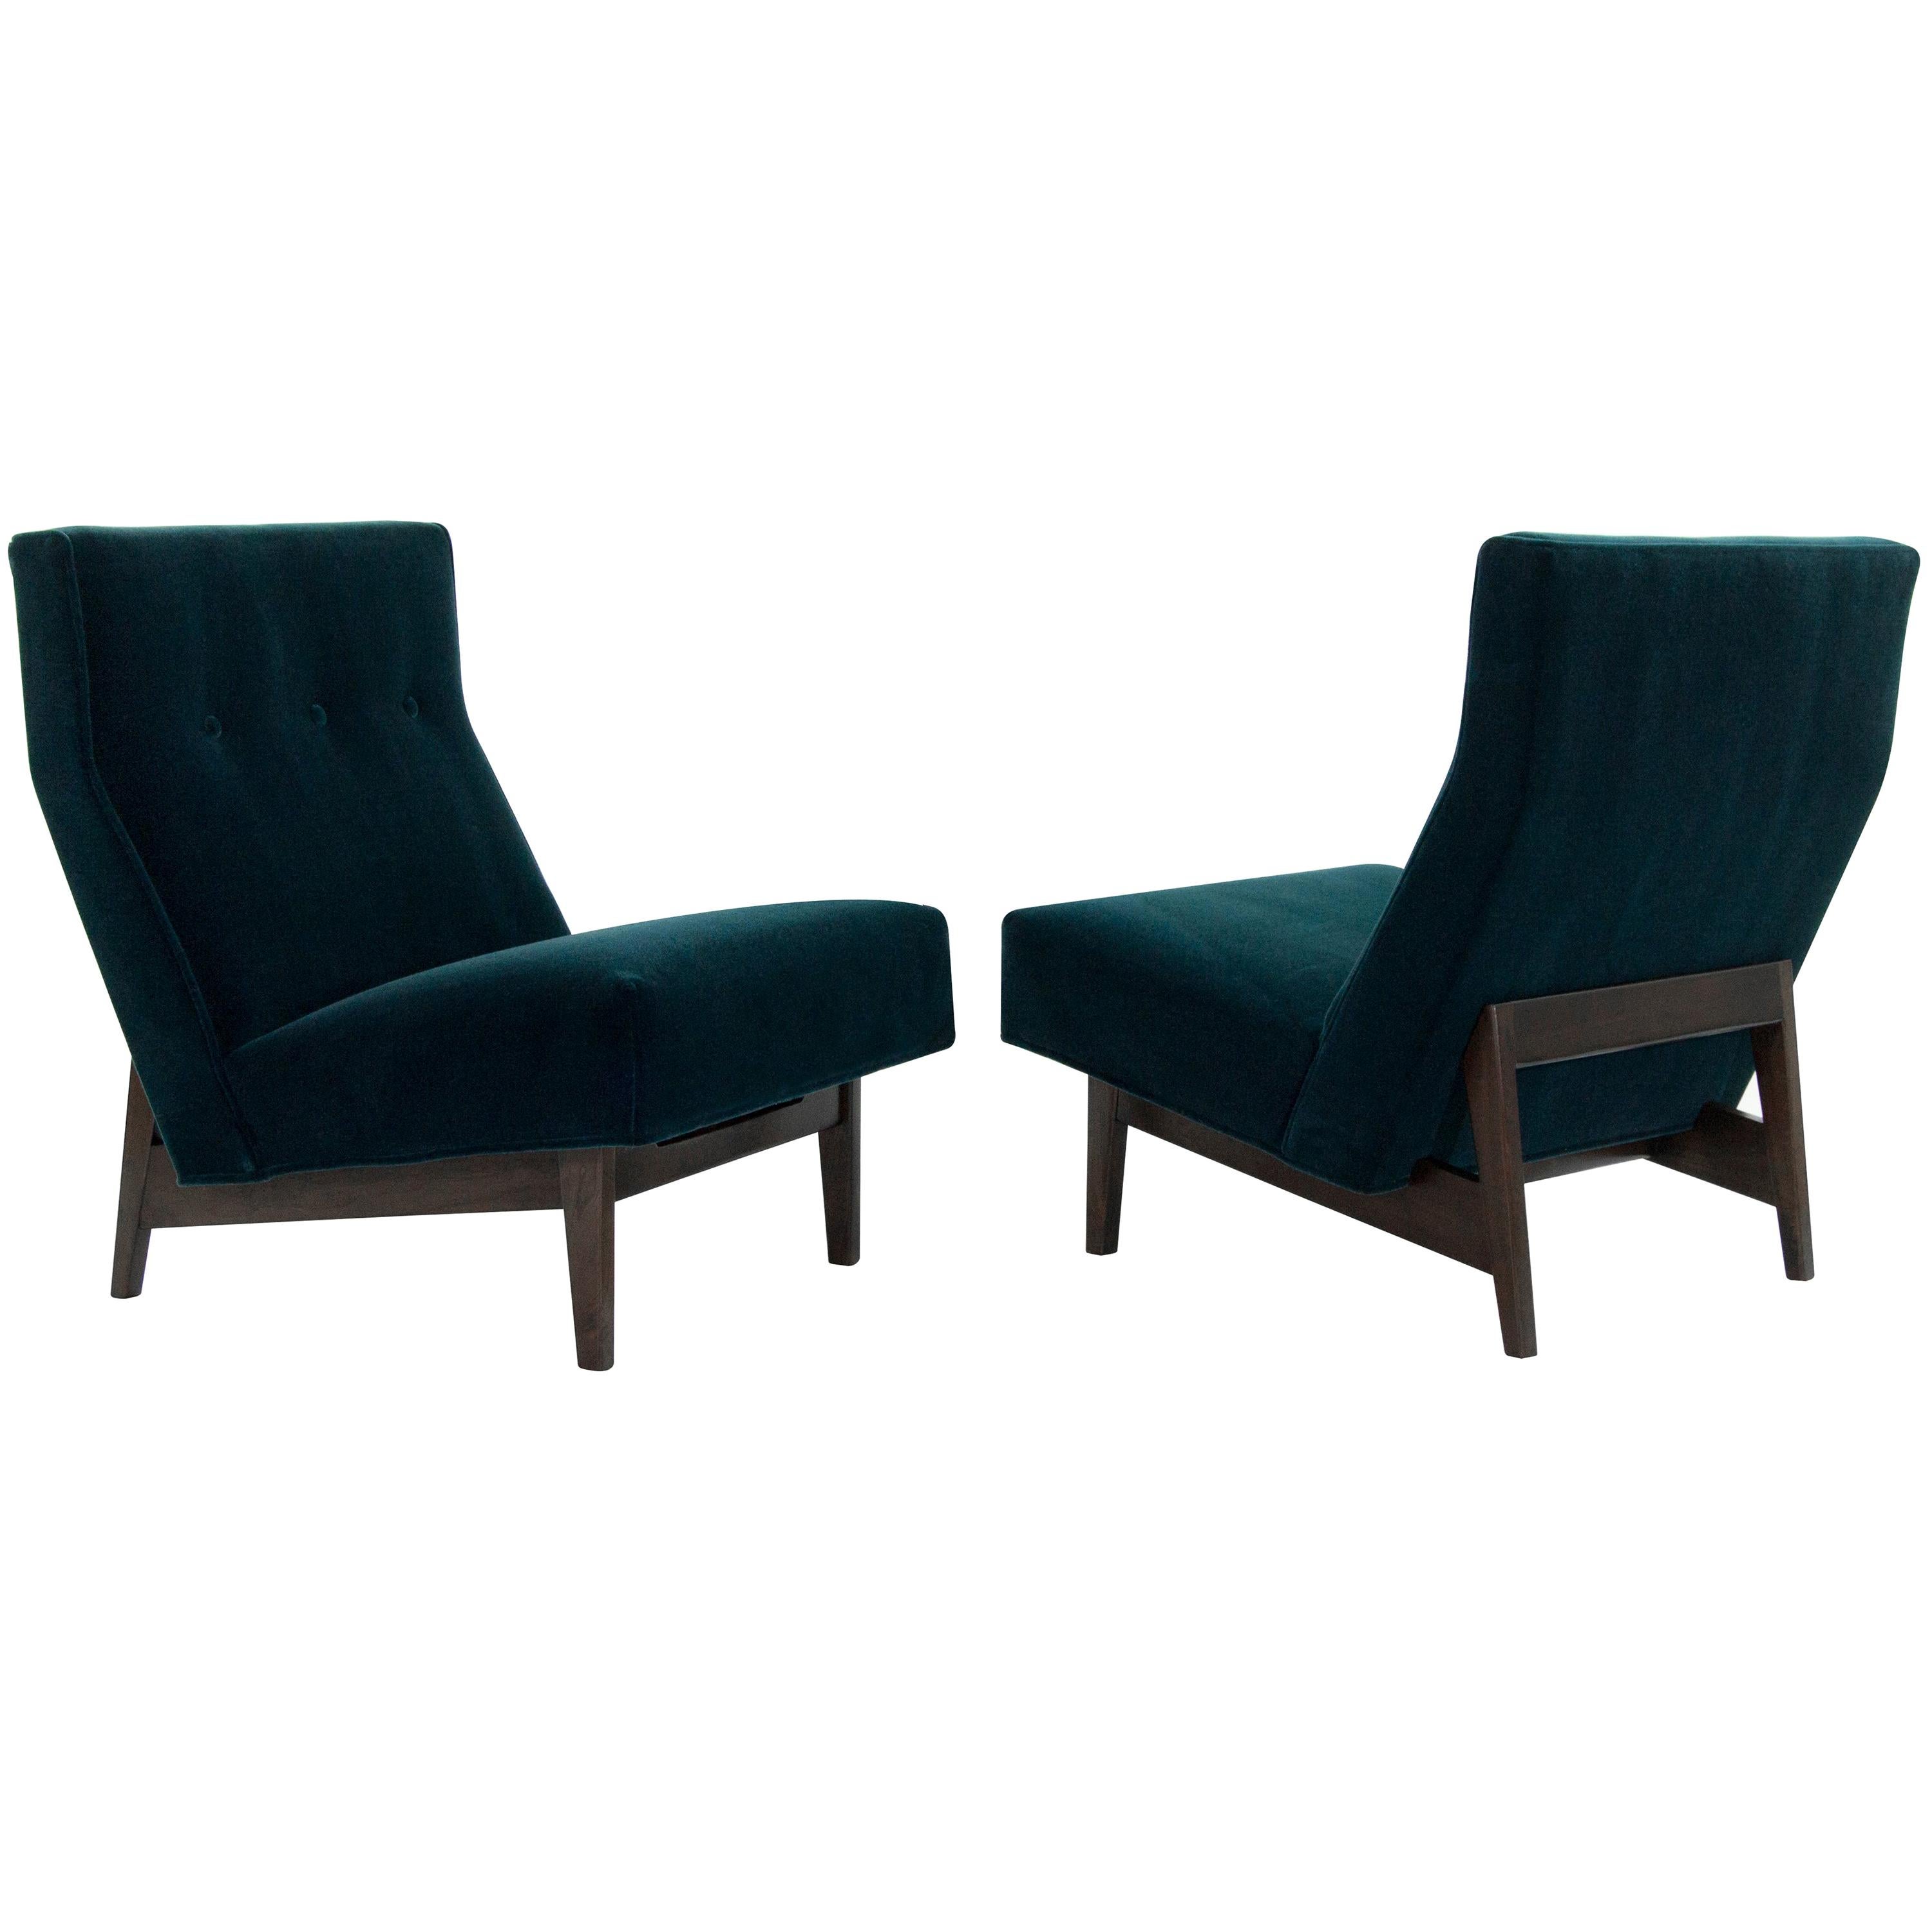 Classic Slipper Chairs by Jens Risom in Teal Mohair, circa 1950s